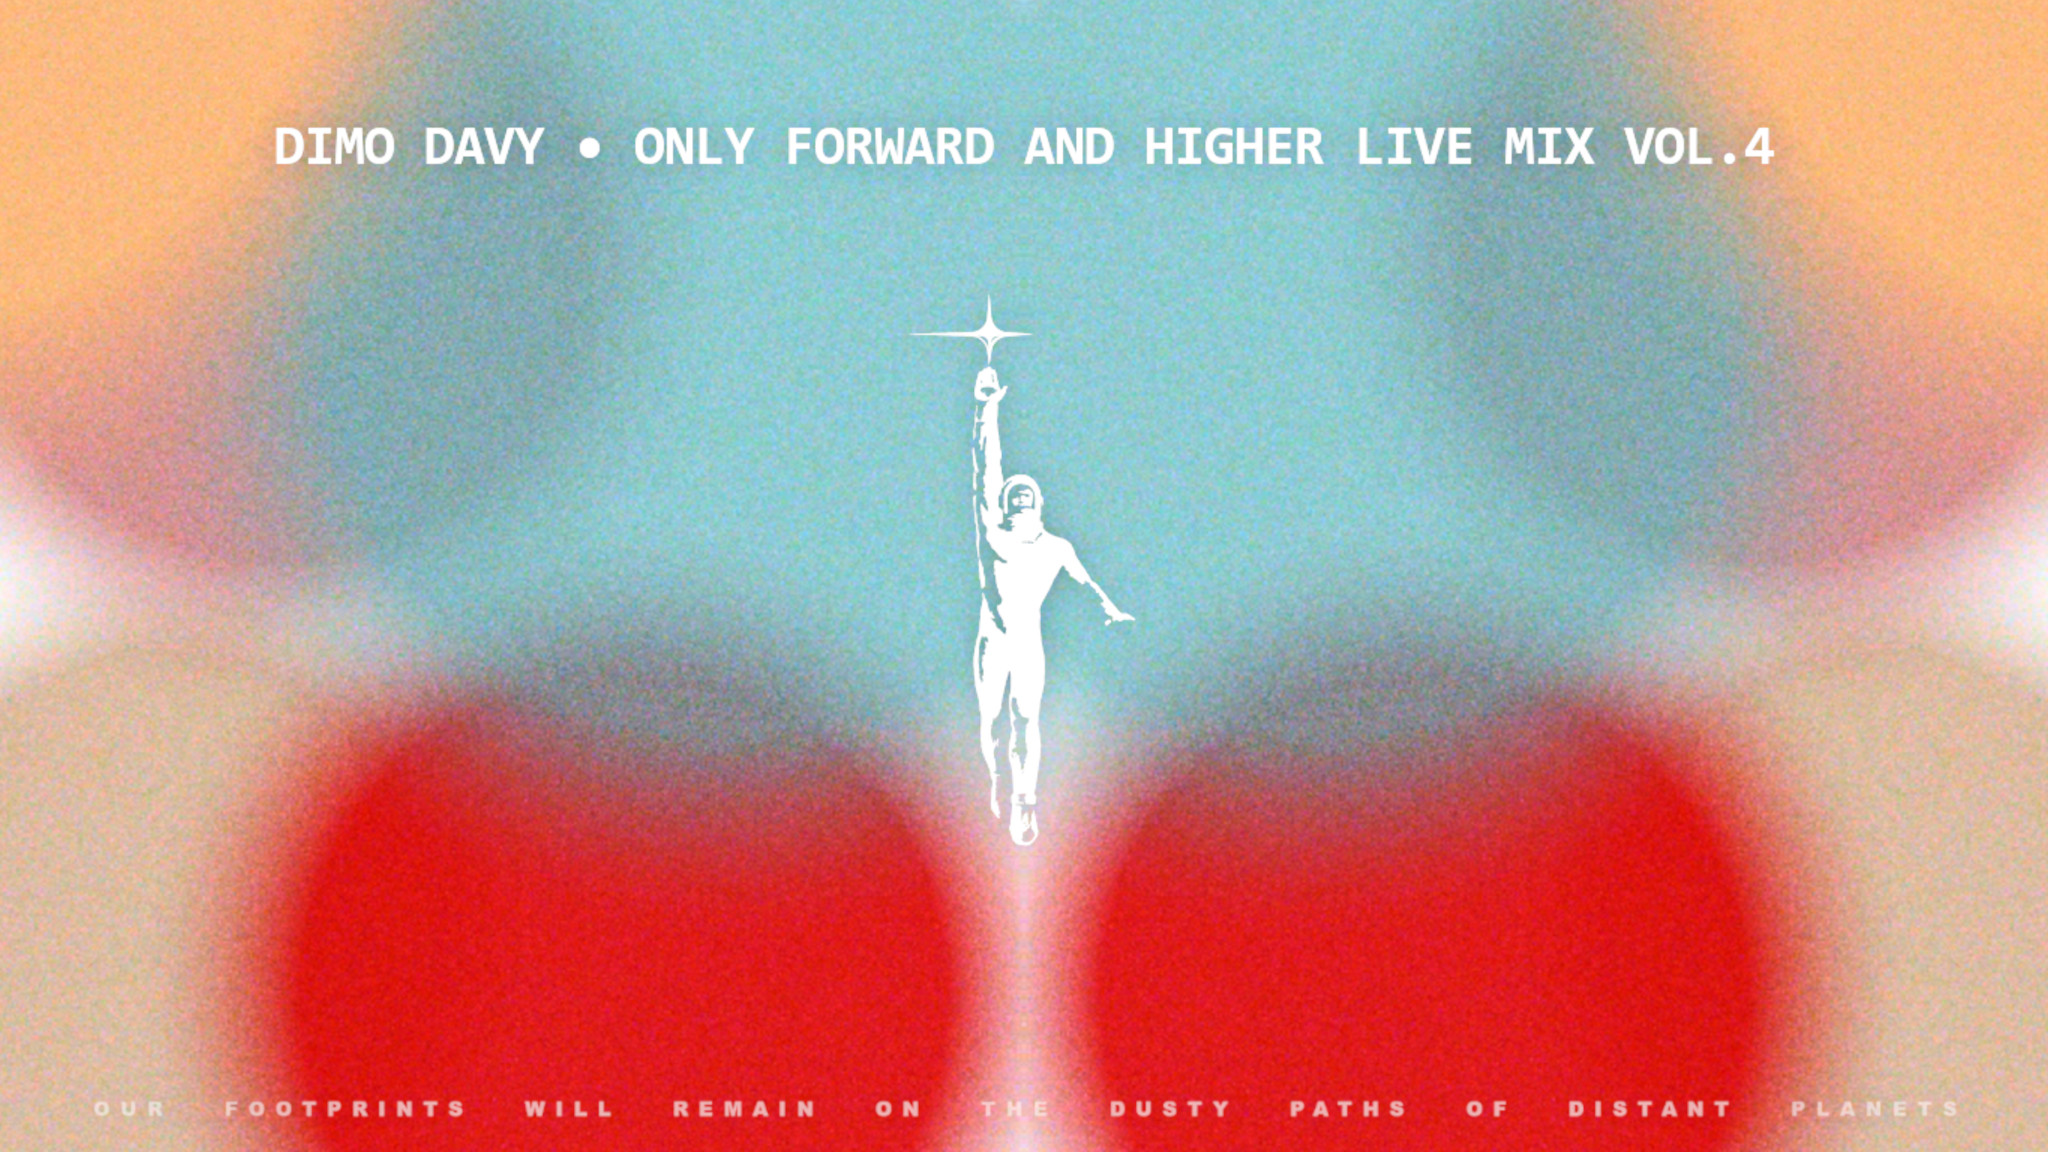 Dimo Davy - Only Forward and Higher Live Mix Vol.4